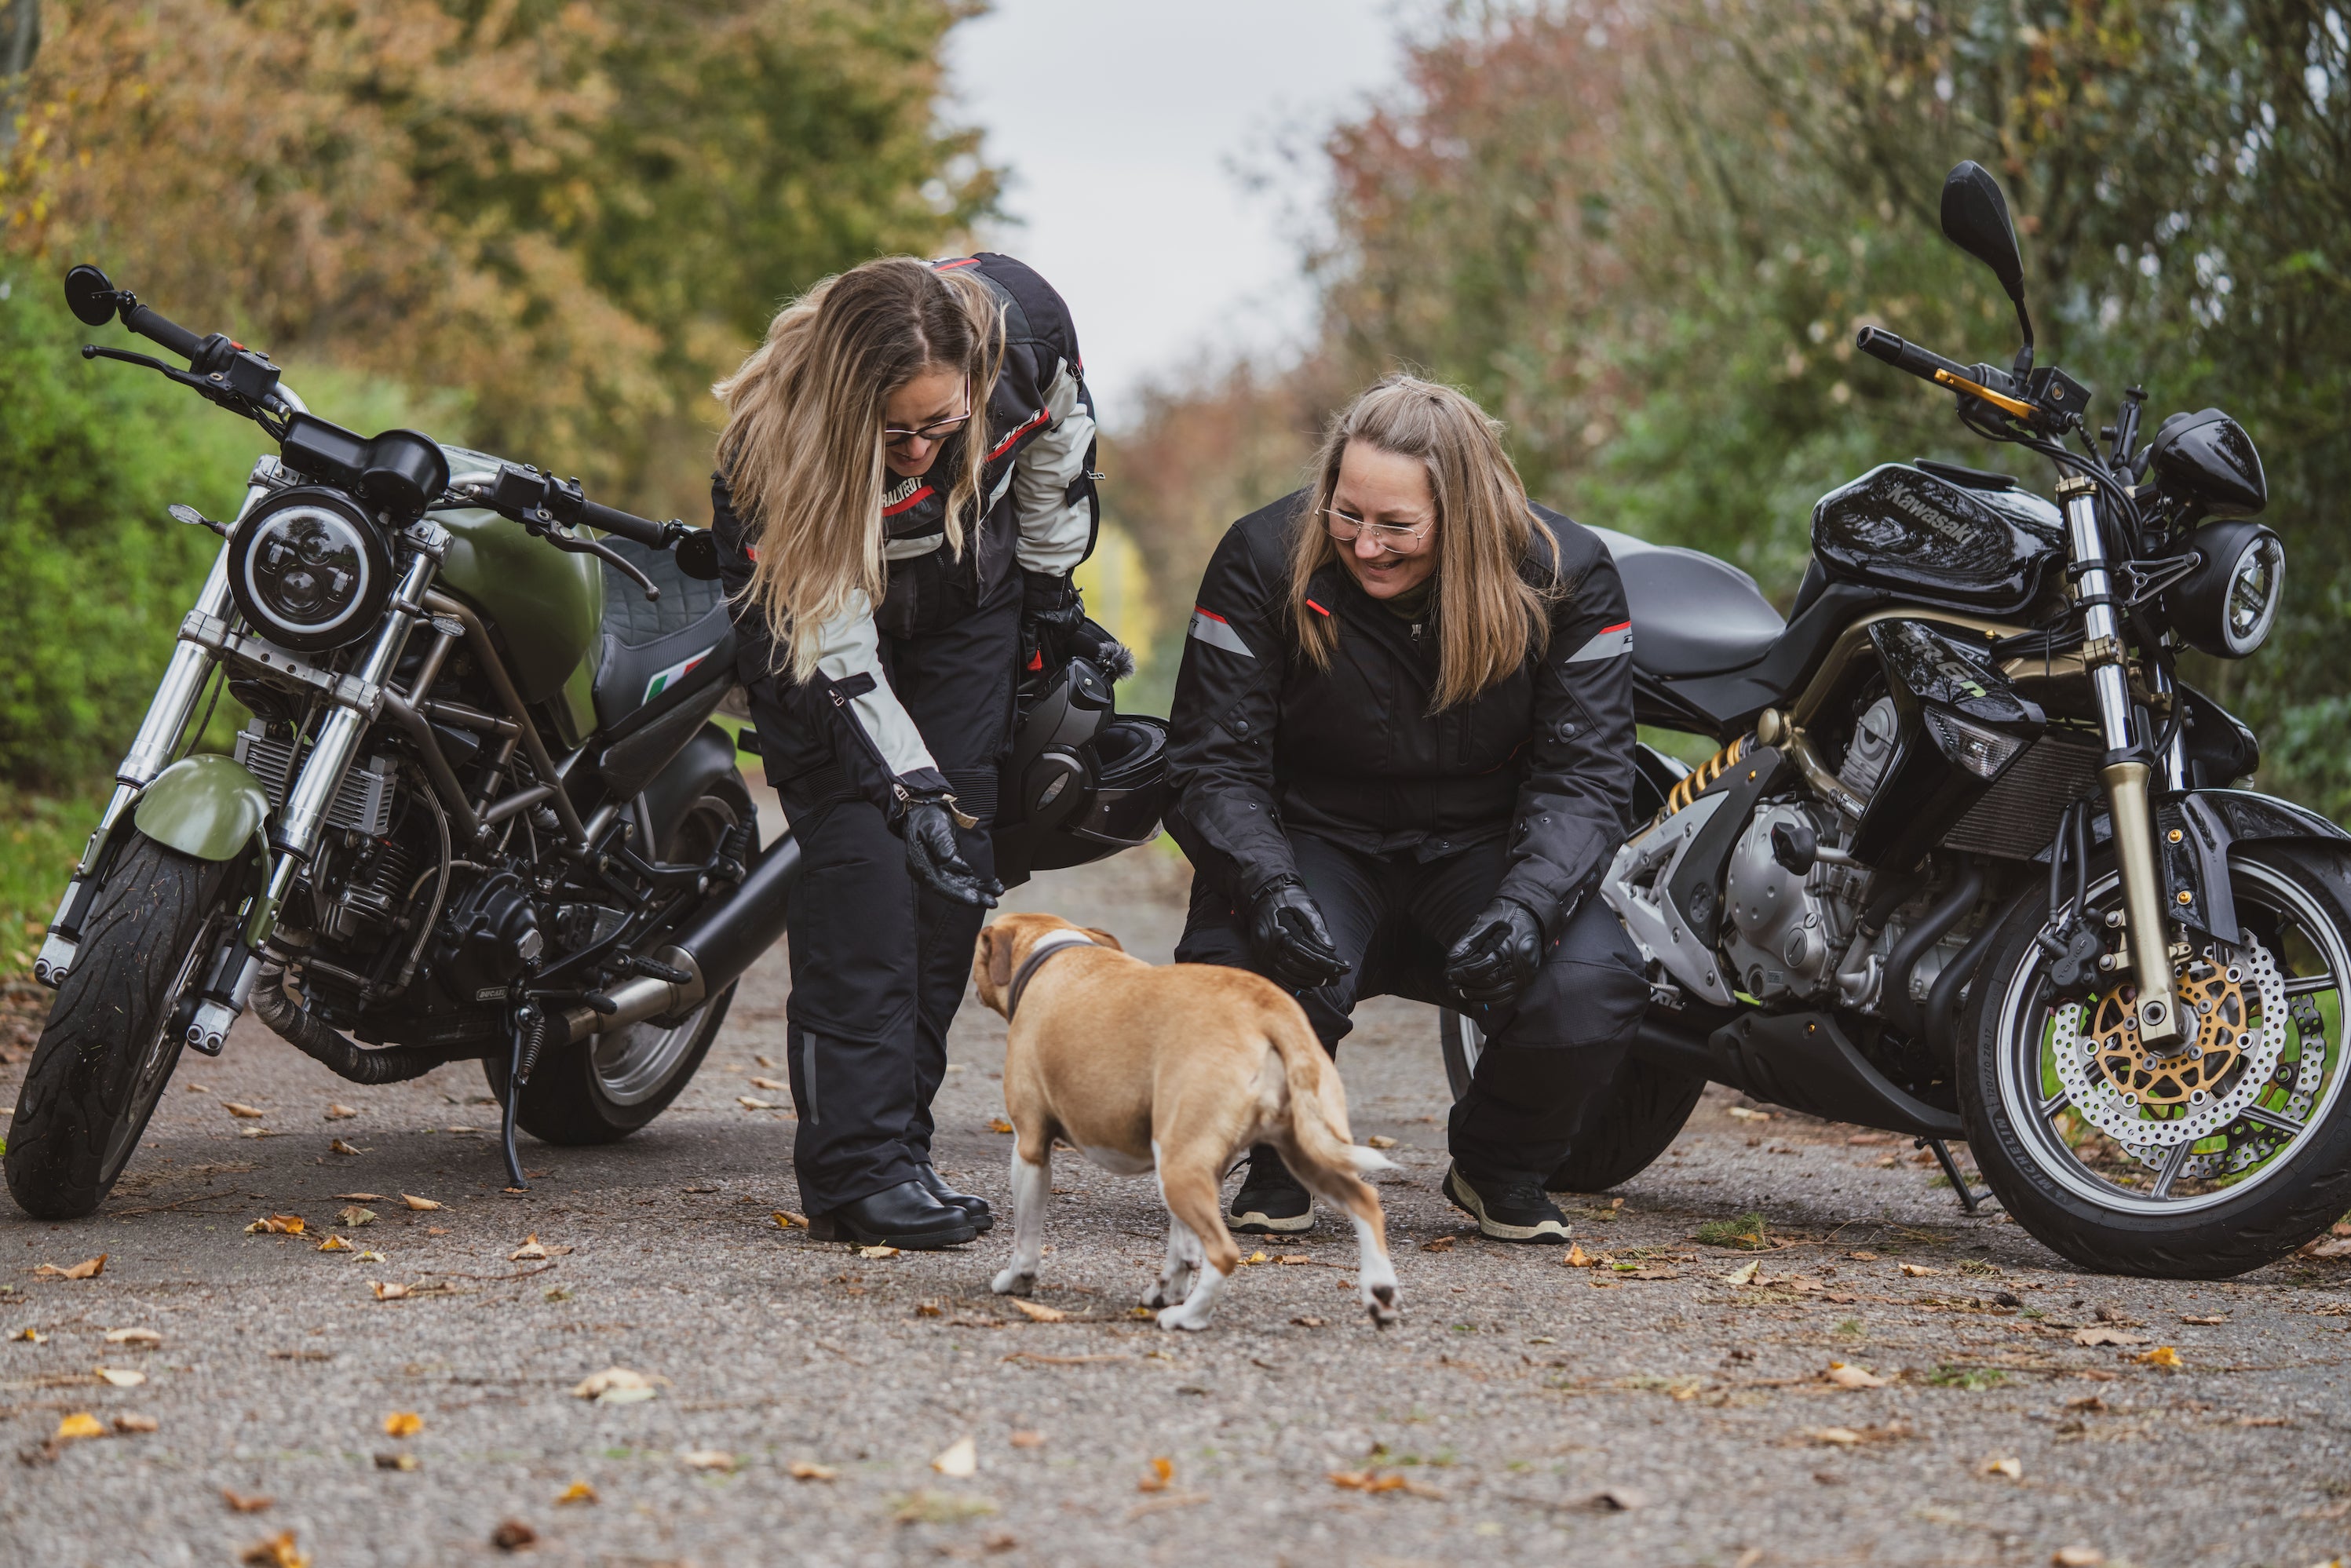 Women motorcyclists greeting a dog 